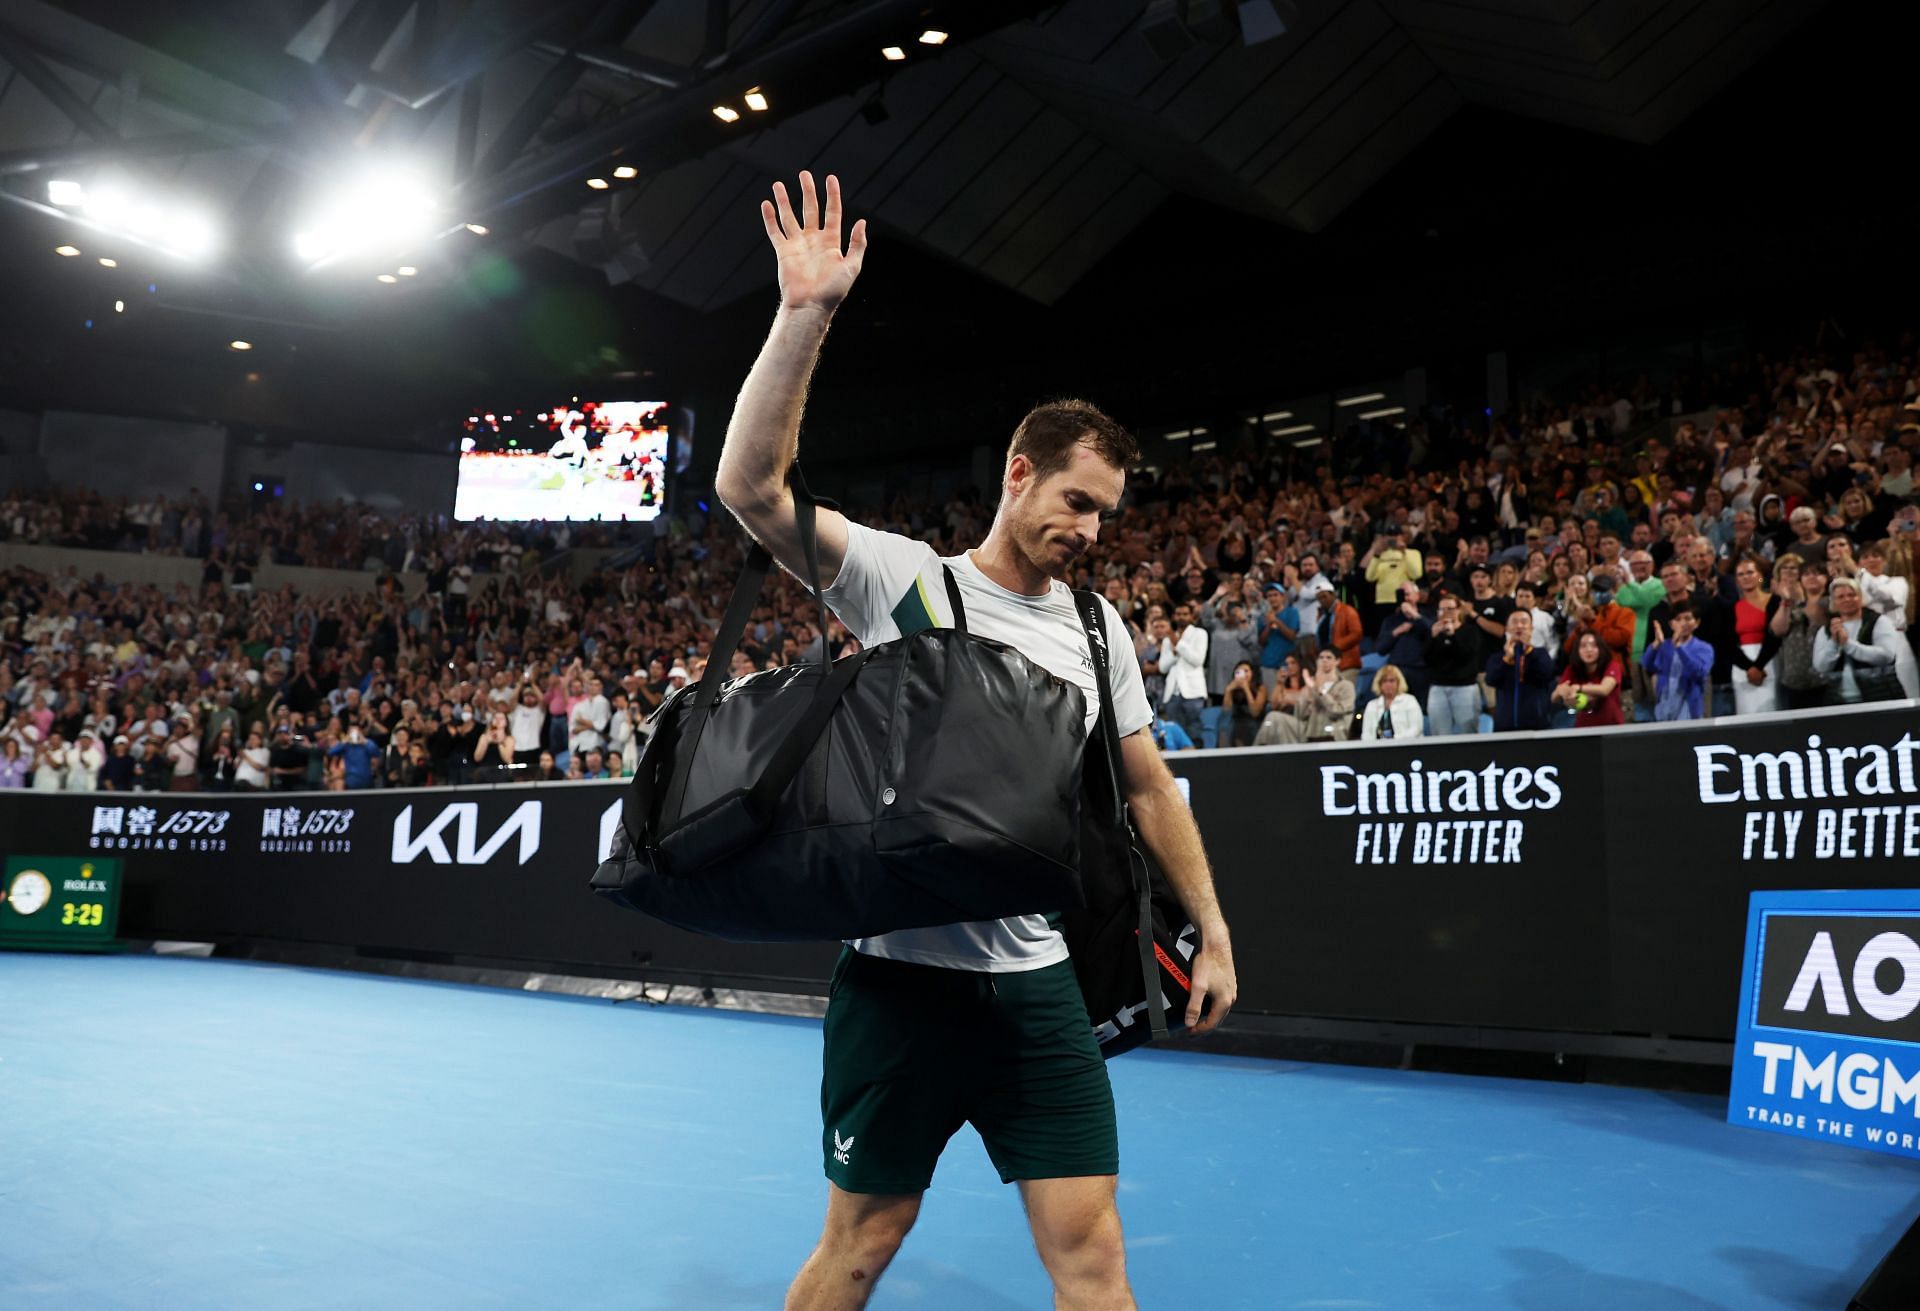 Andy Murray at 2023 Australian Open